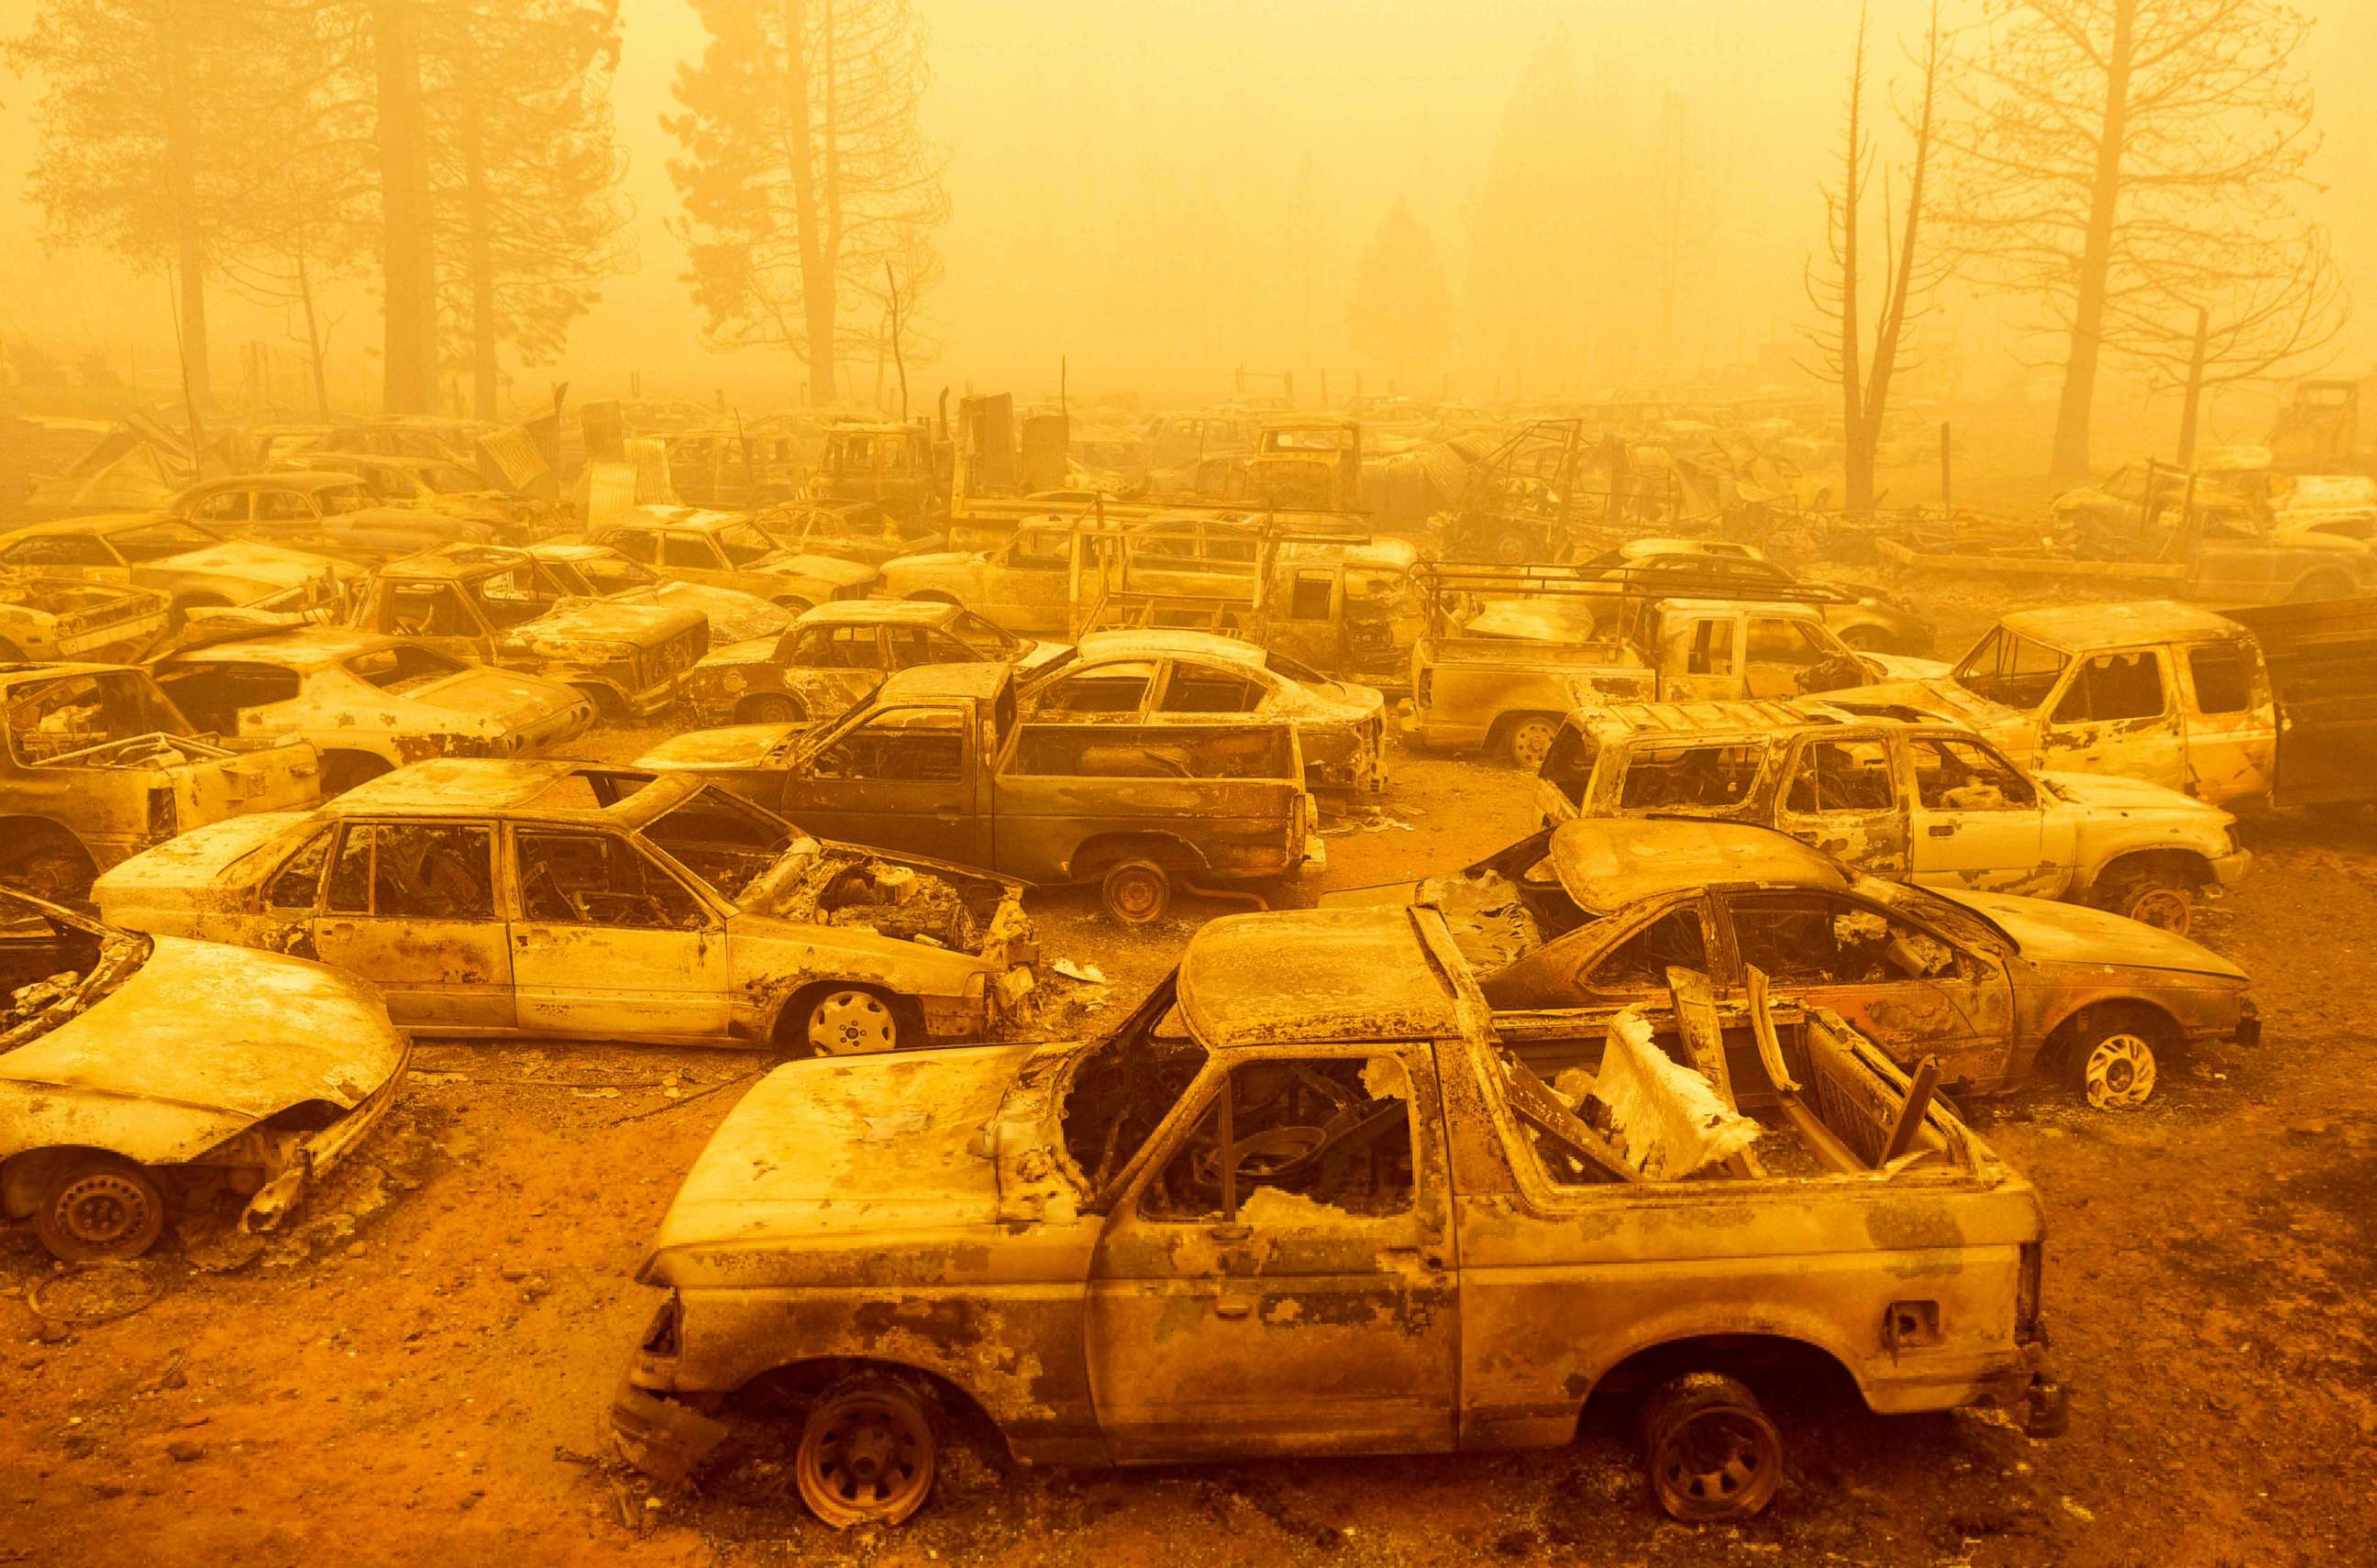 PHOTO: Dozens of burned vehicles rest in heavy smoke during the Dixie fire in Greenville, California, Aug. 6, 2021.